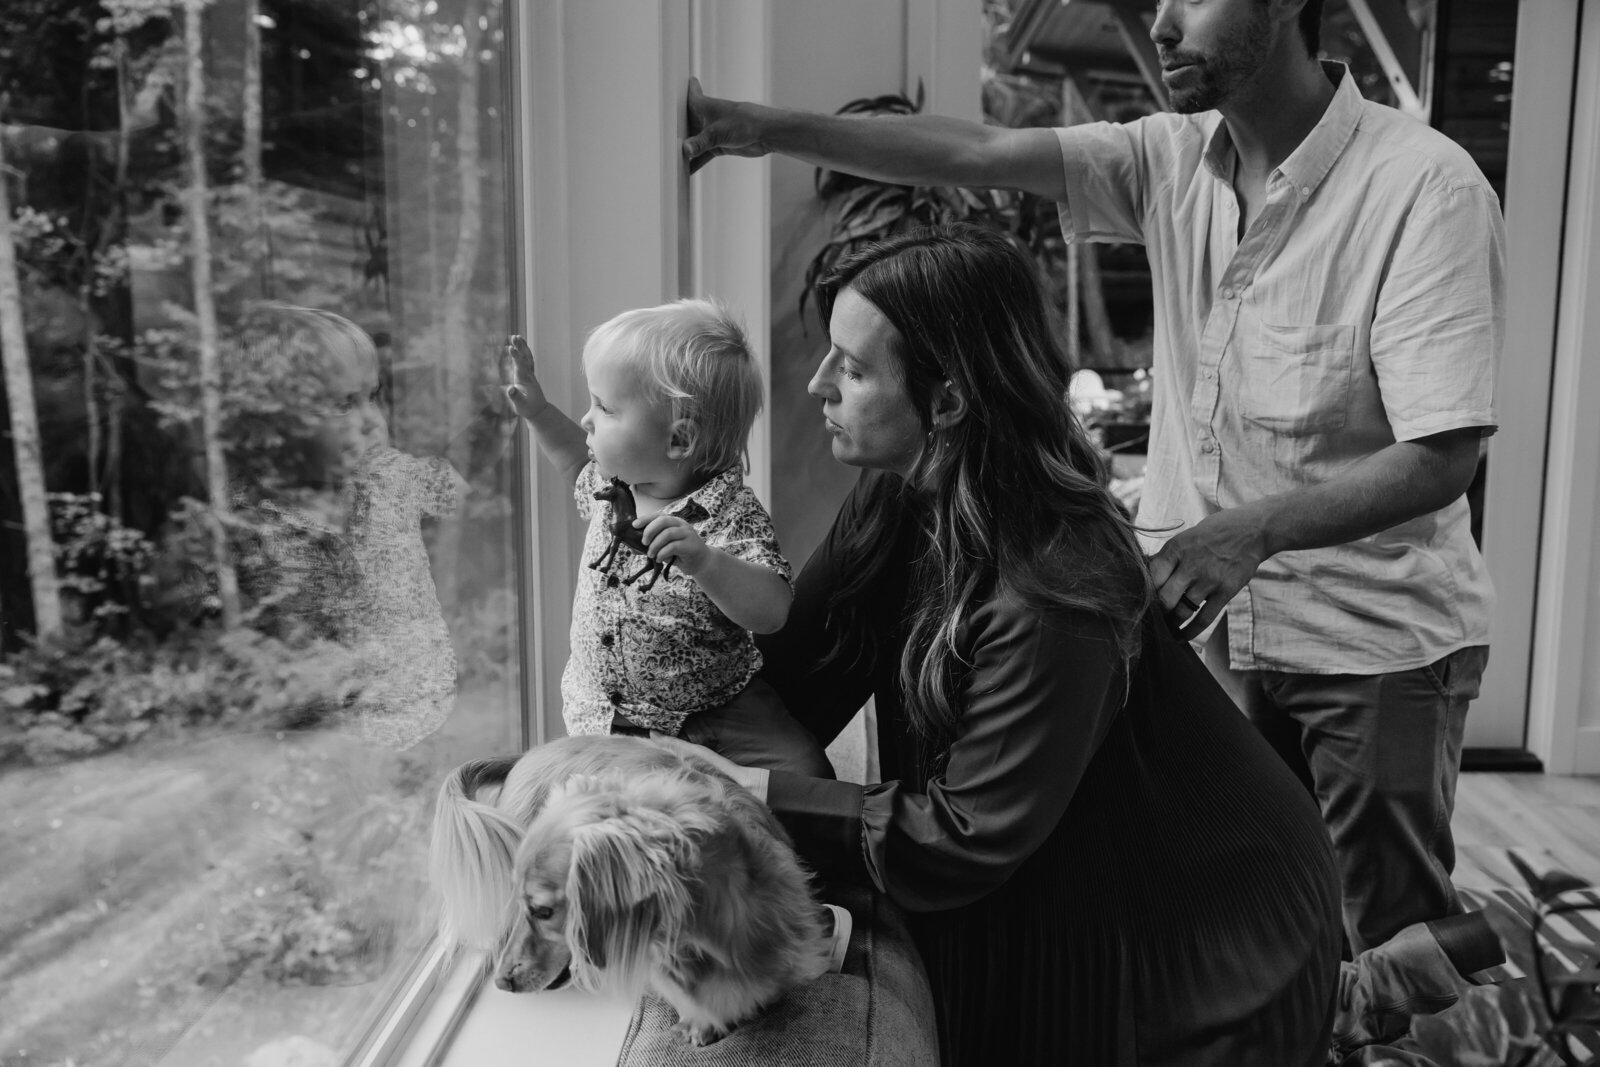 Family looks out the window together